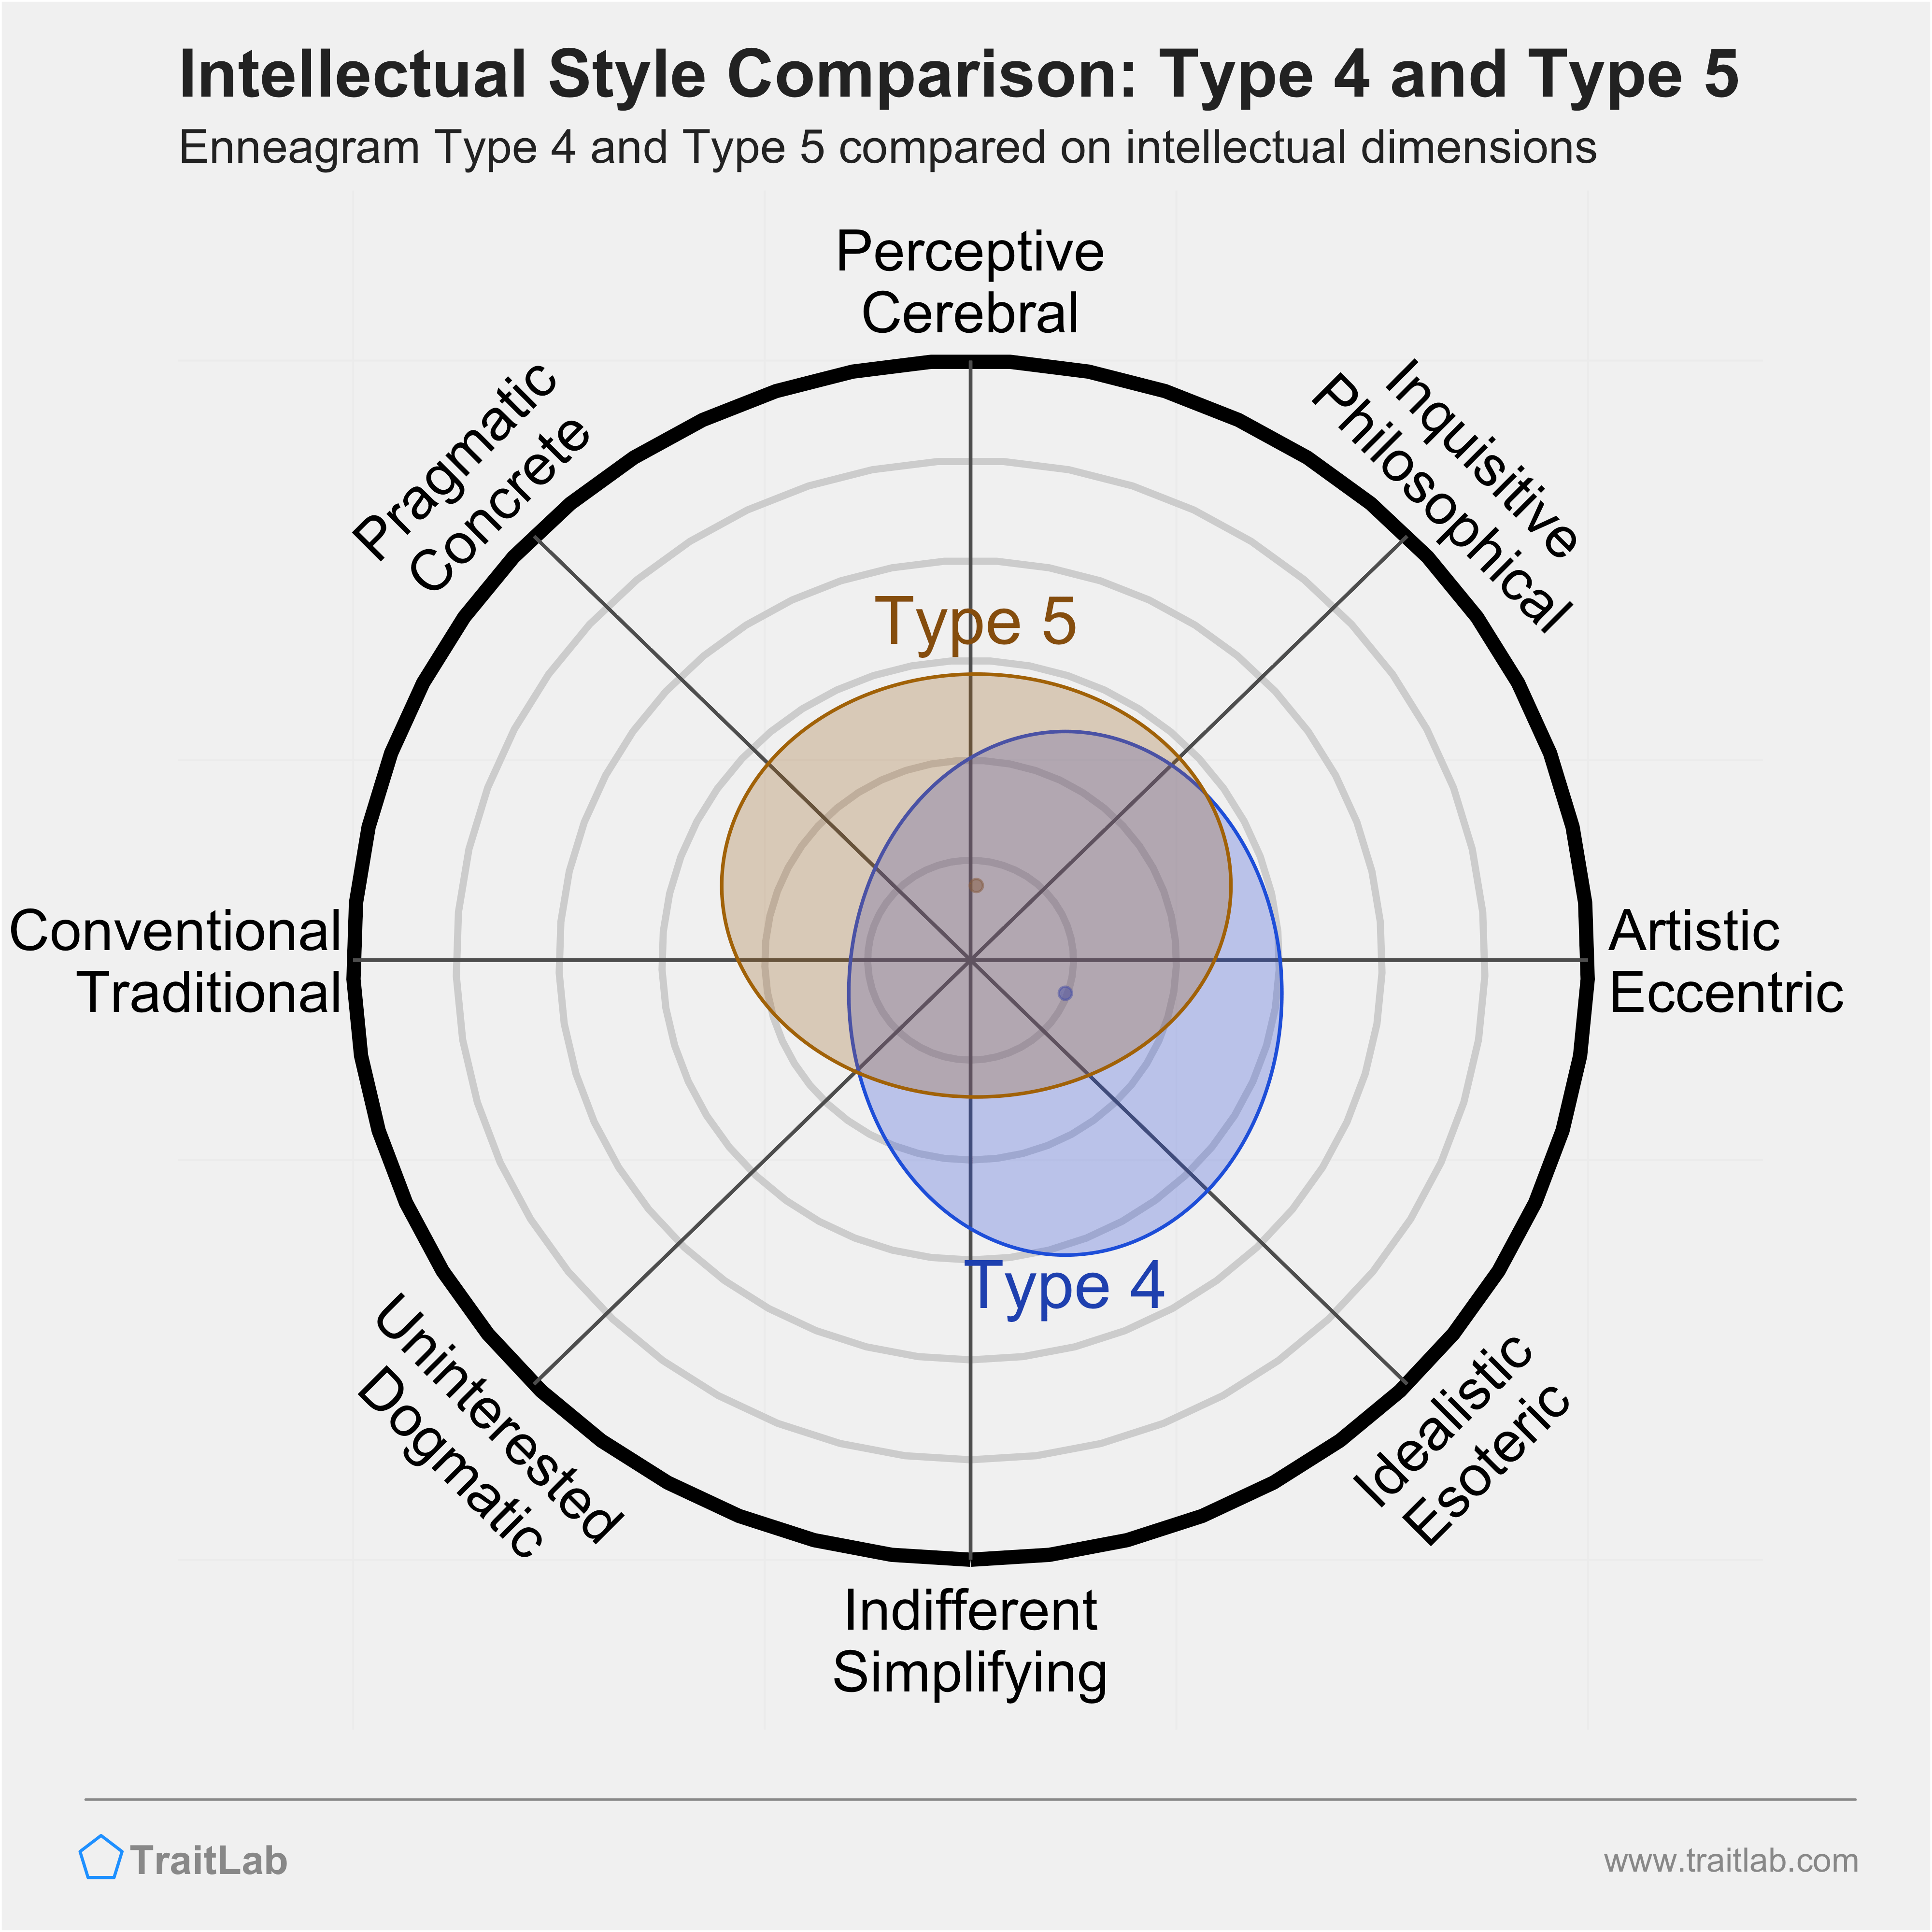 Type 4 and Type 5 comparison across intellectual dimensions